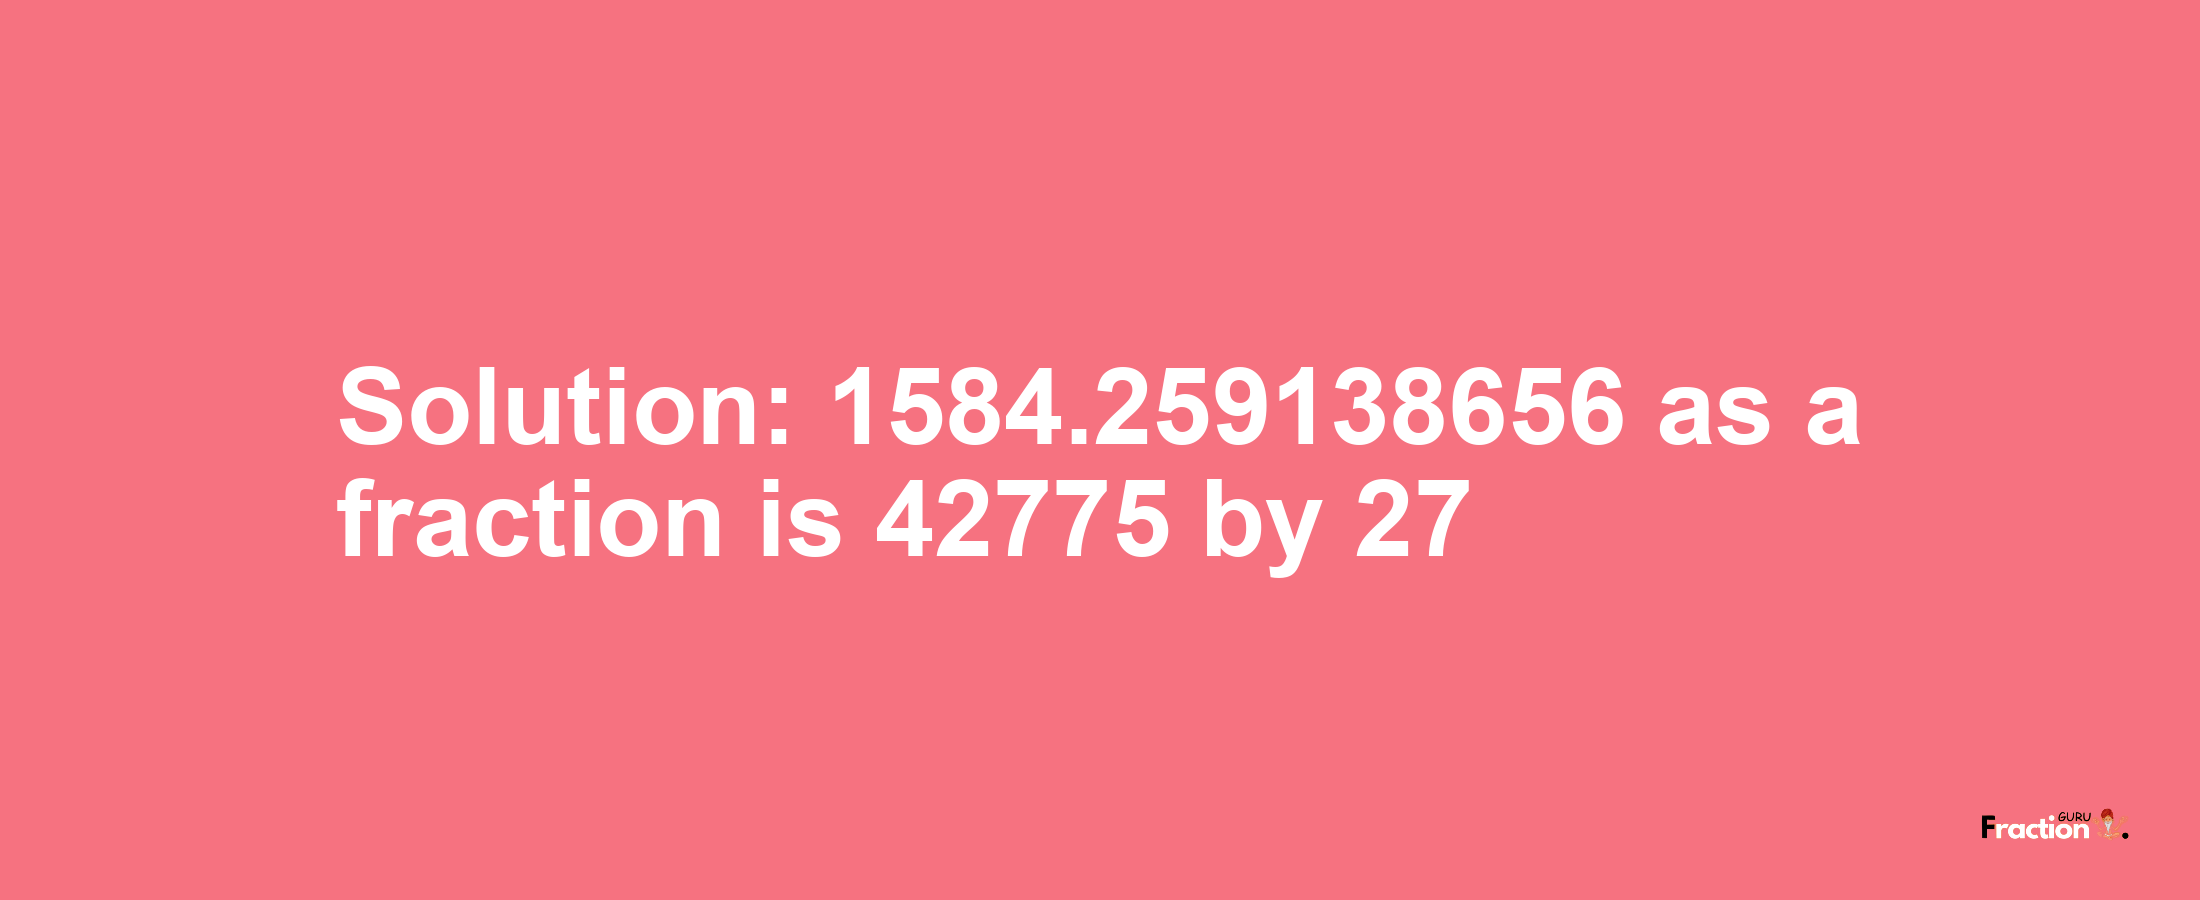 Solution:1584.259138656 as a fraction is 42775/27